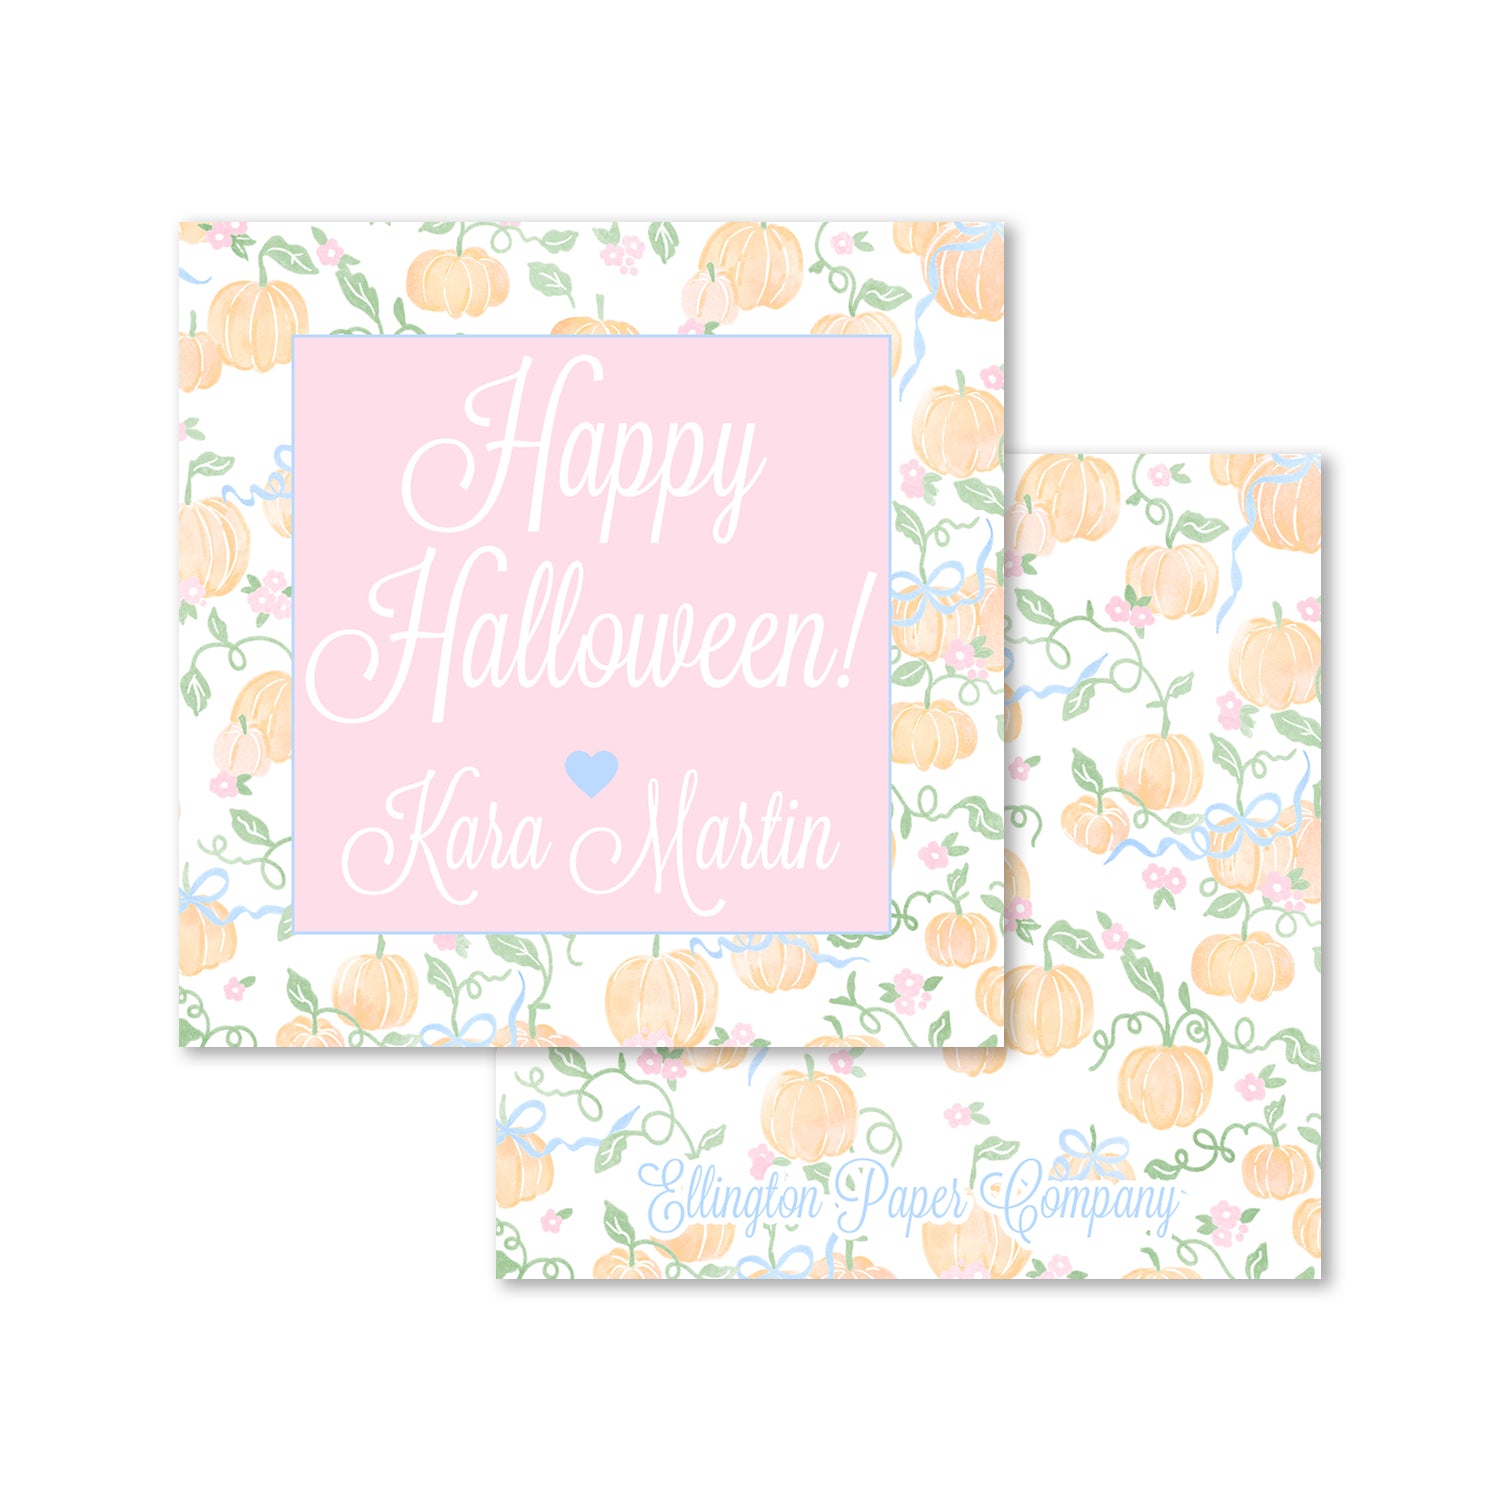 Little Pumpkin Pattern Halloween Enclosure Cards and Stickers